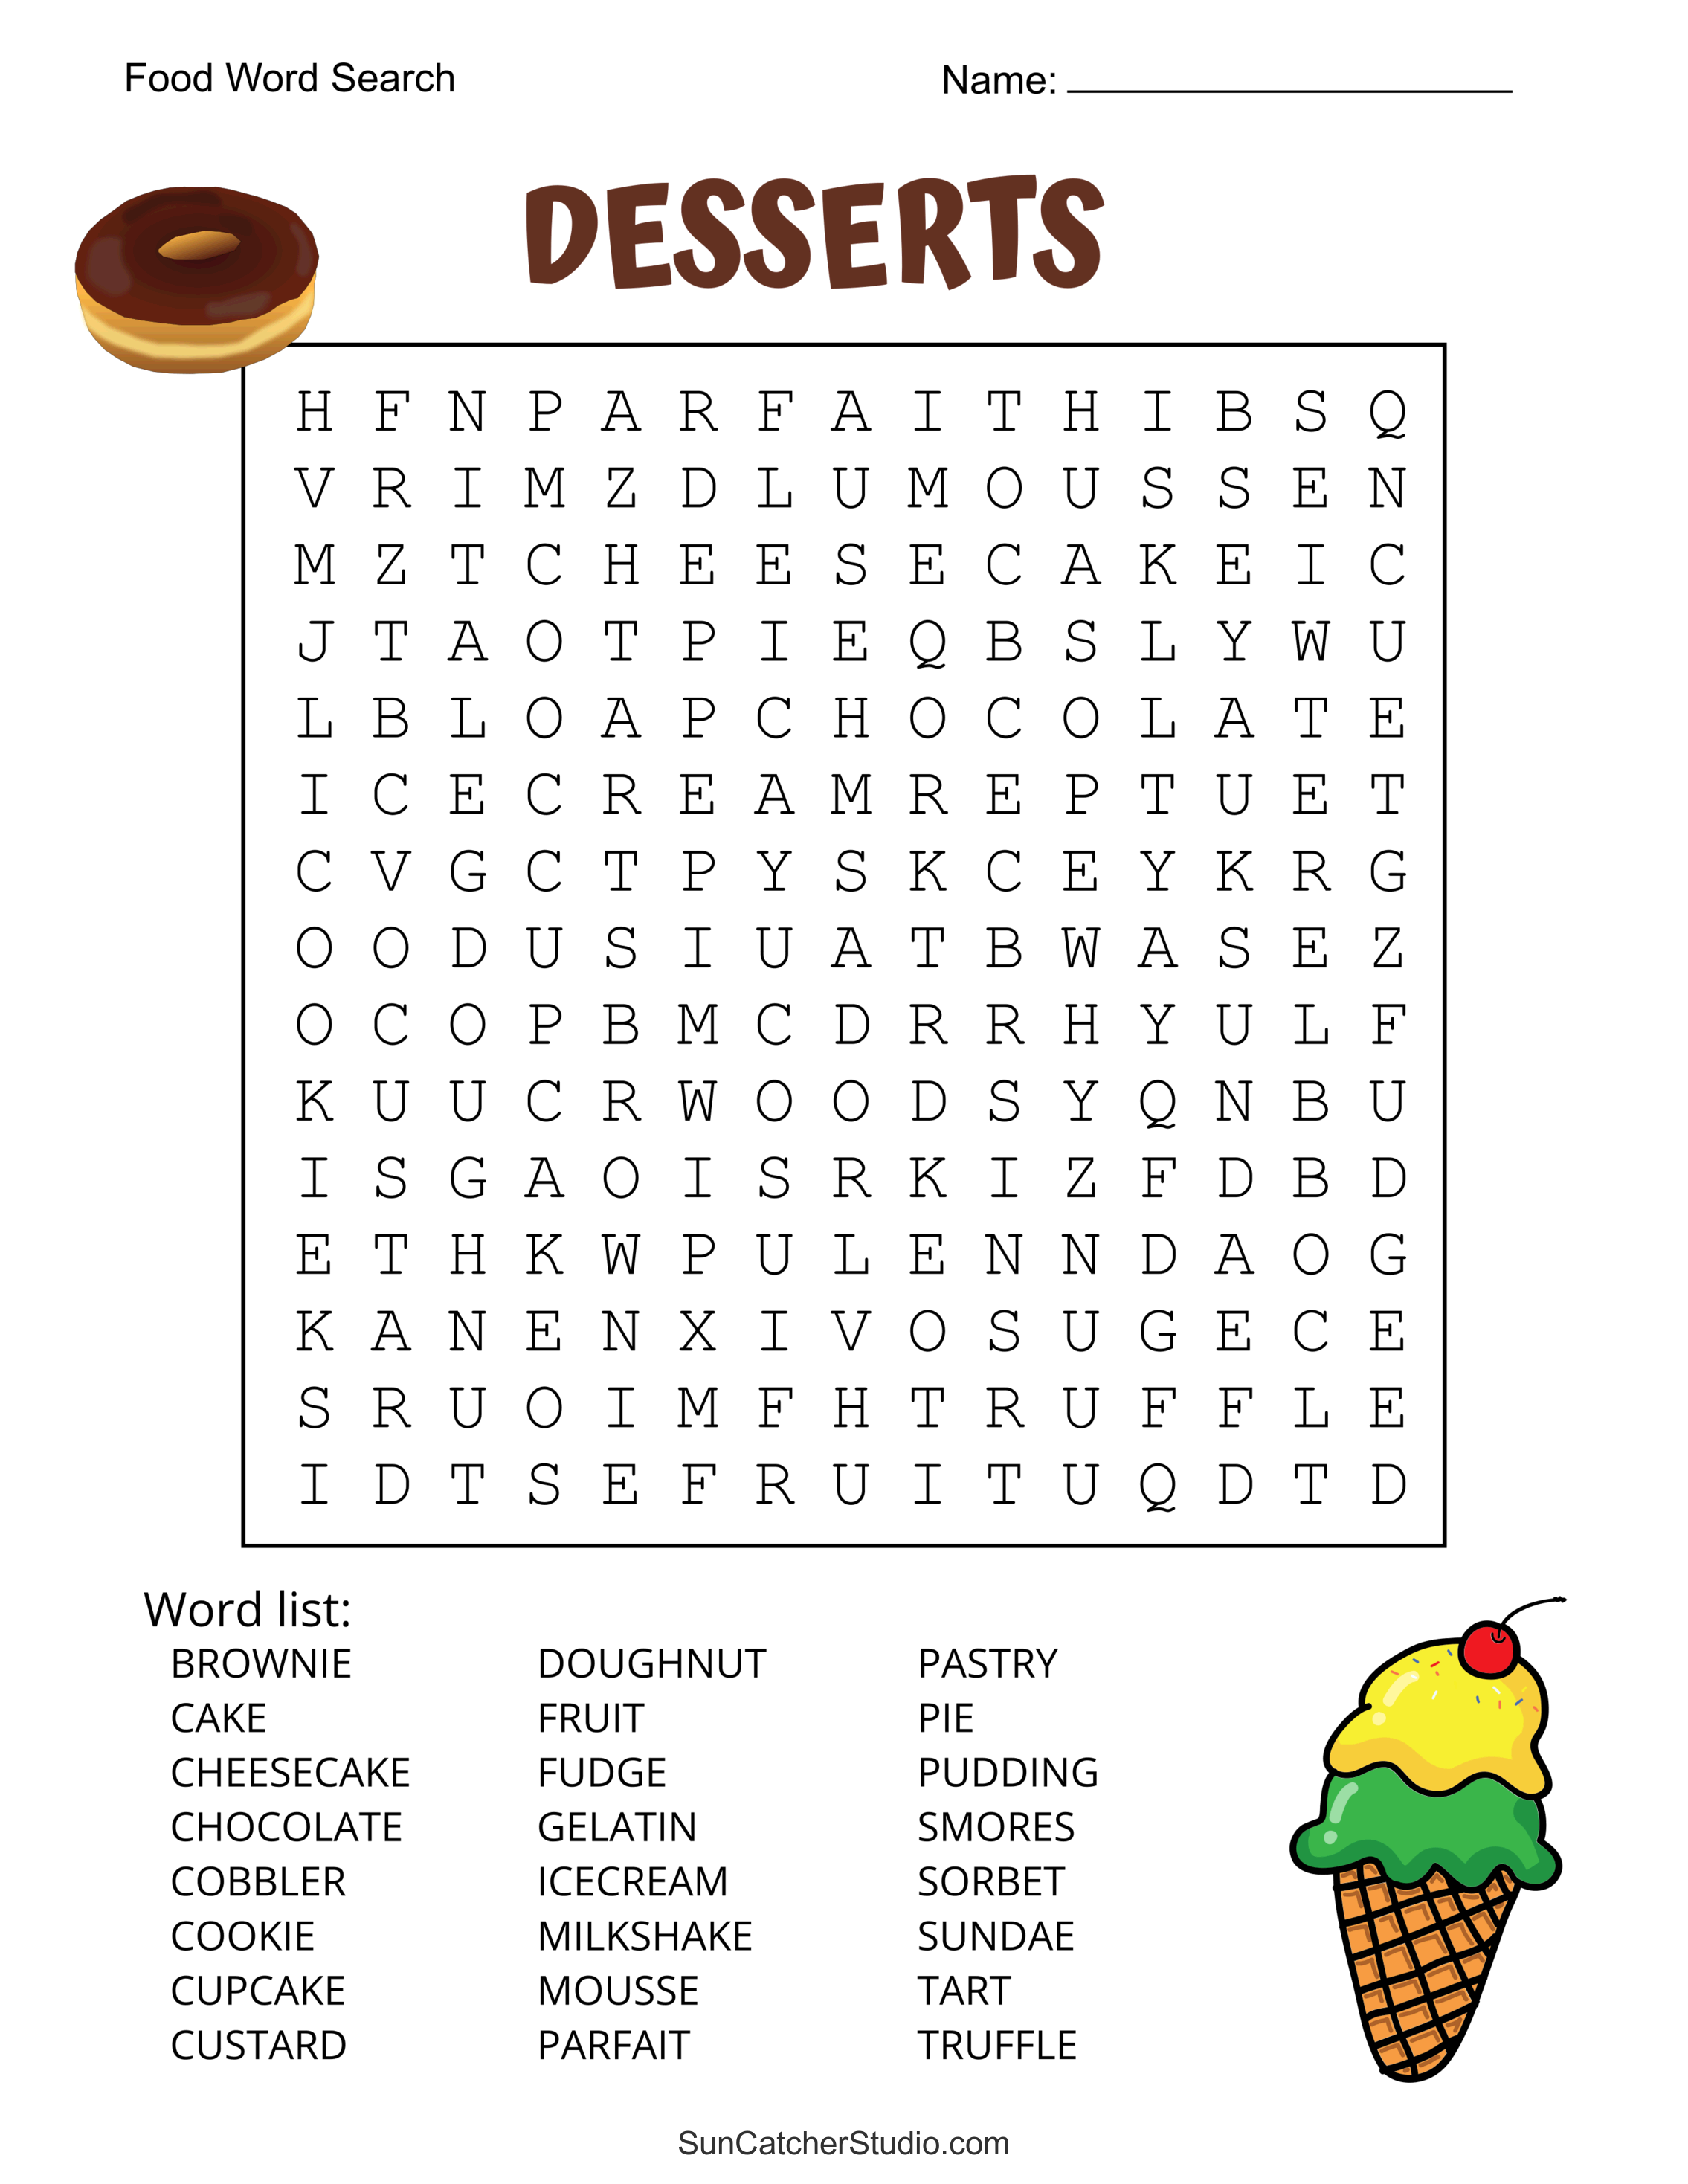 Flavorful food word search